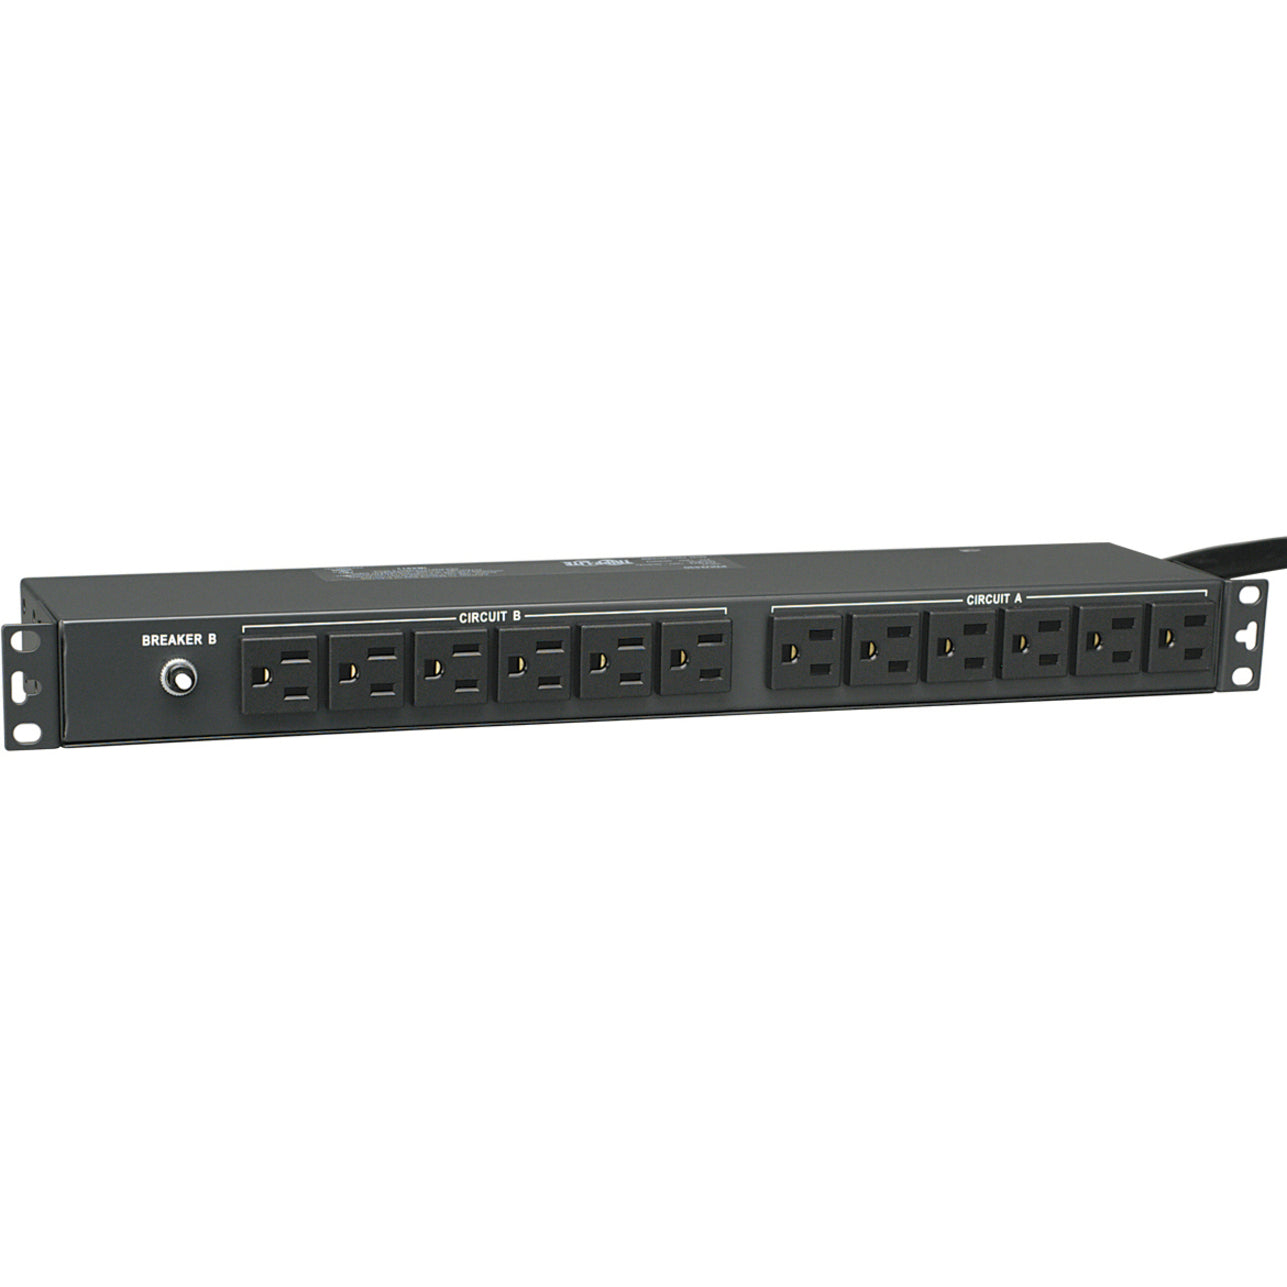 Tripp Lite PDU2430 2.9kW Single-Phase 120V Basic PDU, 24 Outlet Power Strip with 15ft Cord